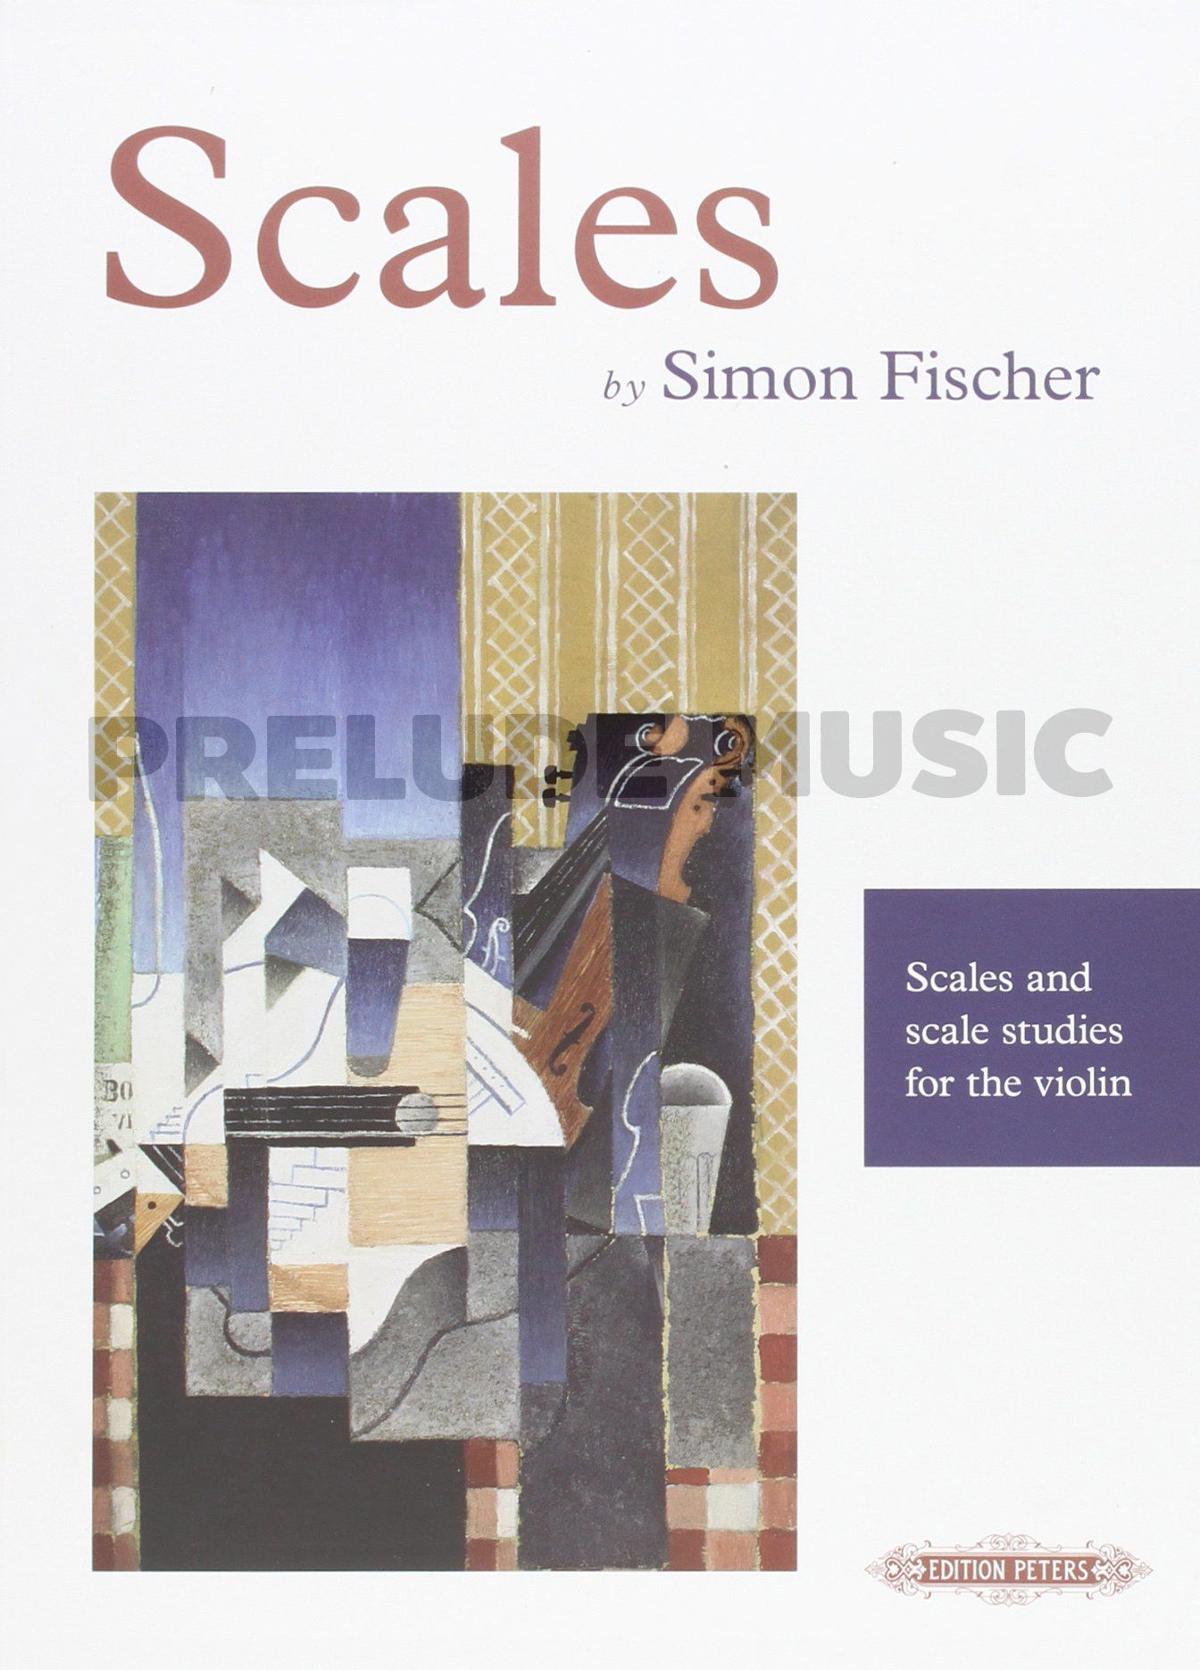 Scales by Simon Fischer